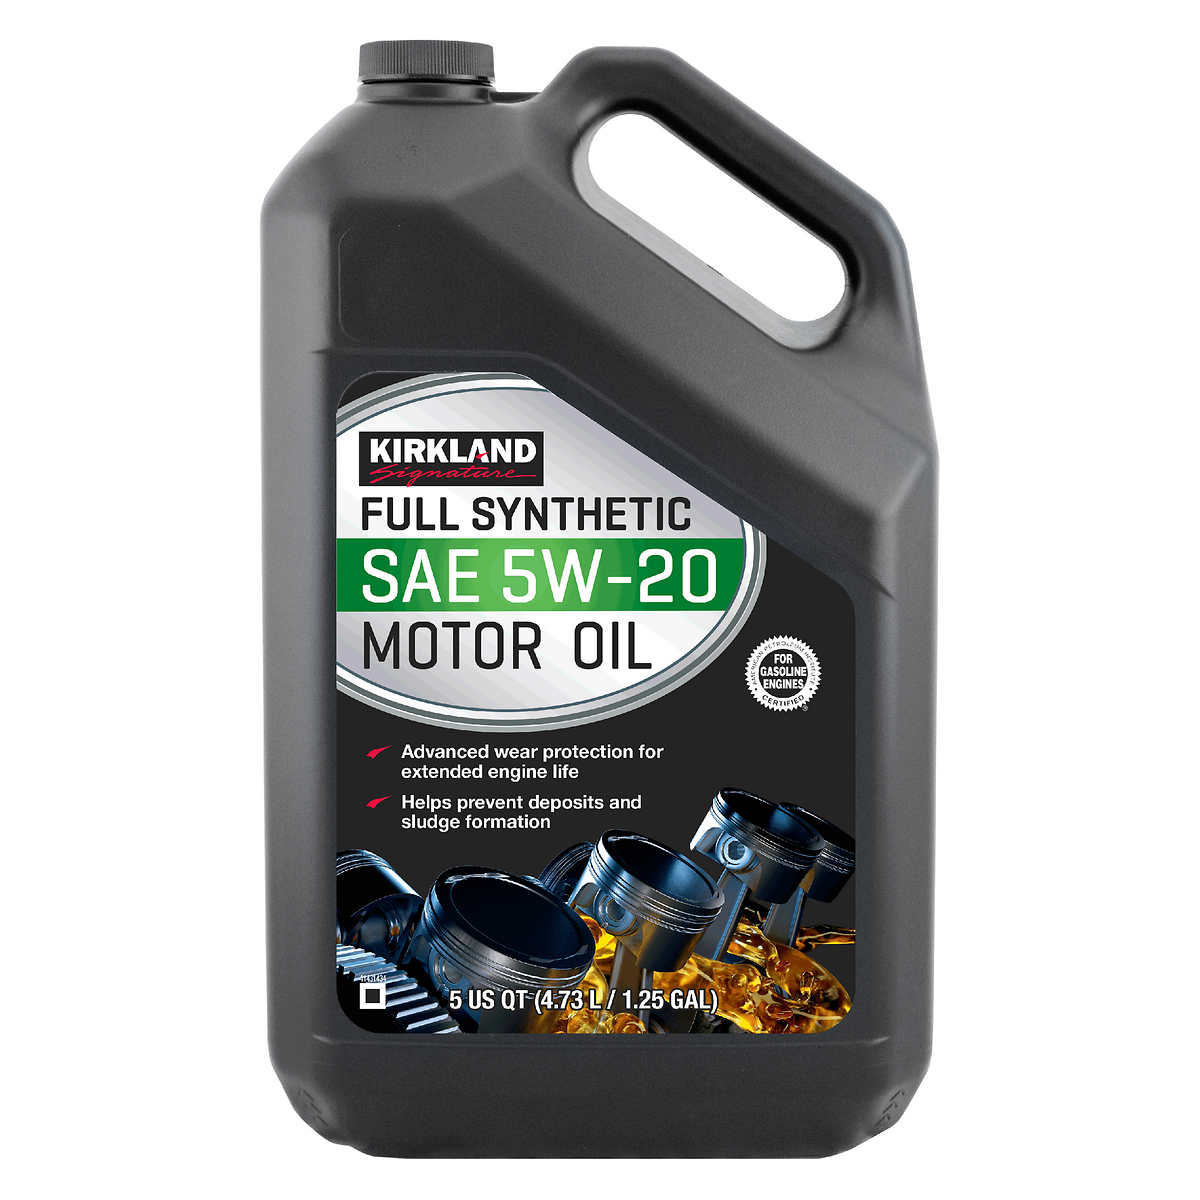 AMSOIL Signature Series 5W-20 100% Synthetic Motor Oil